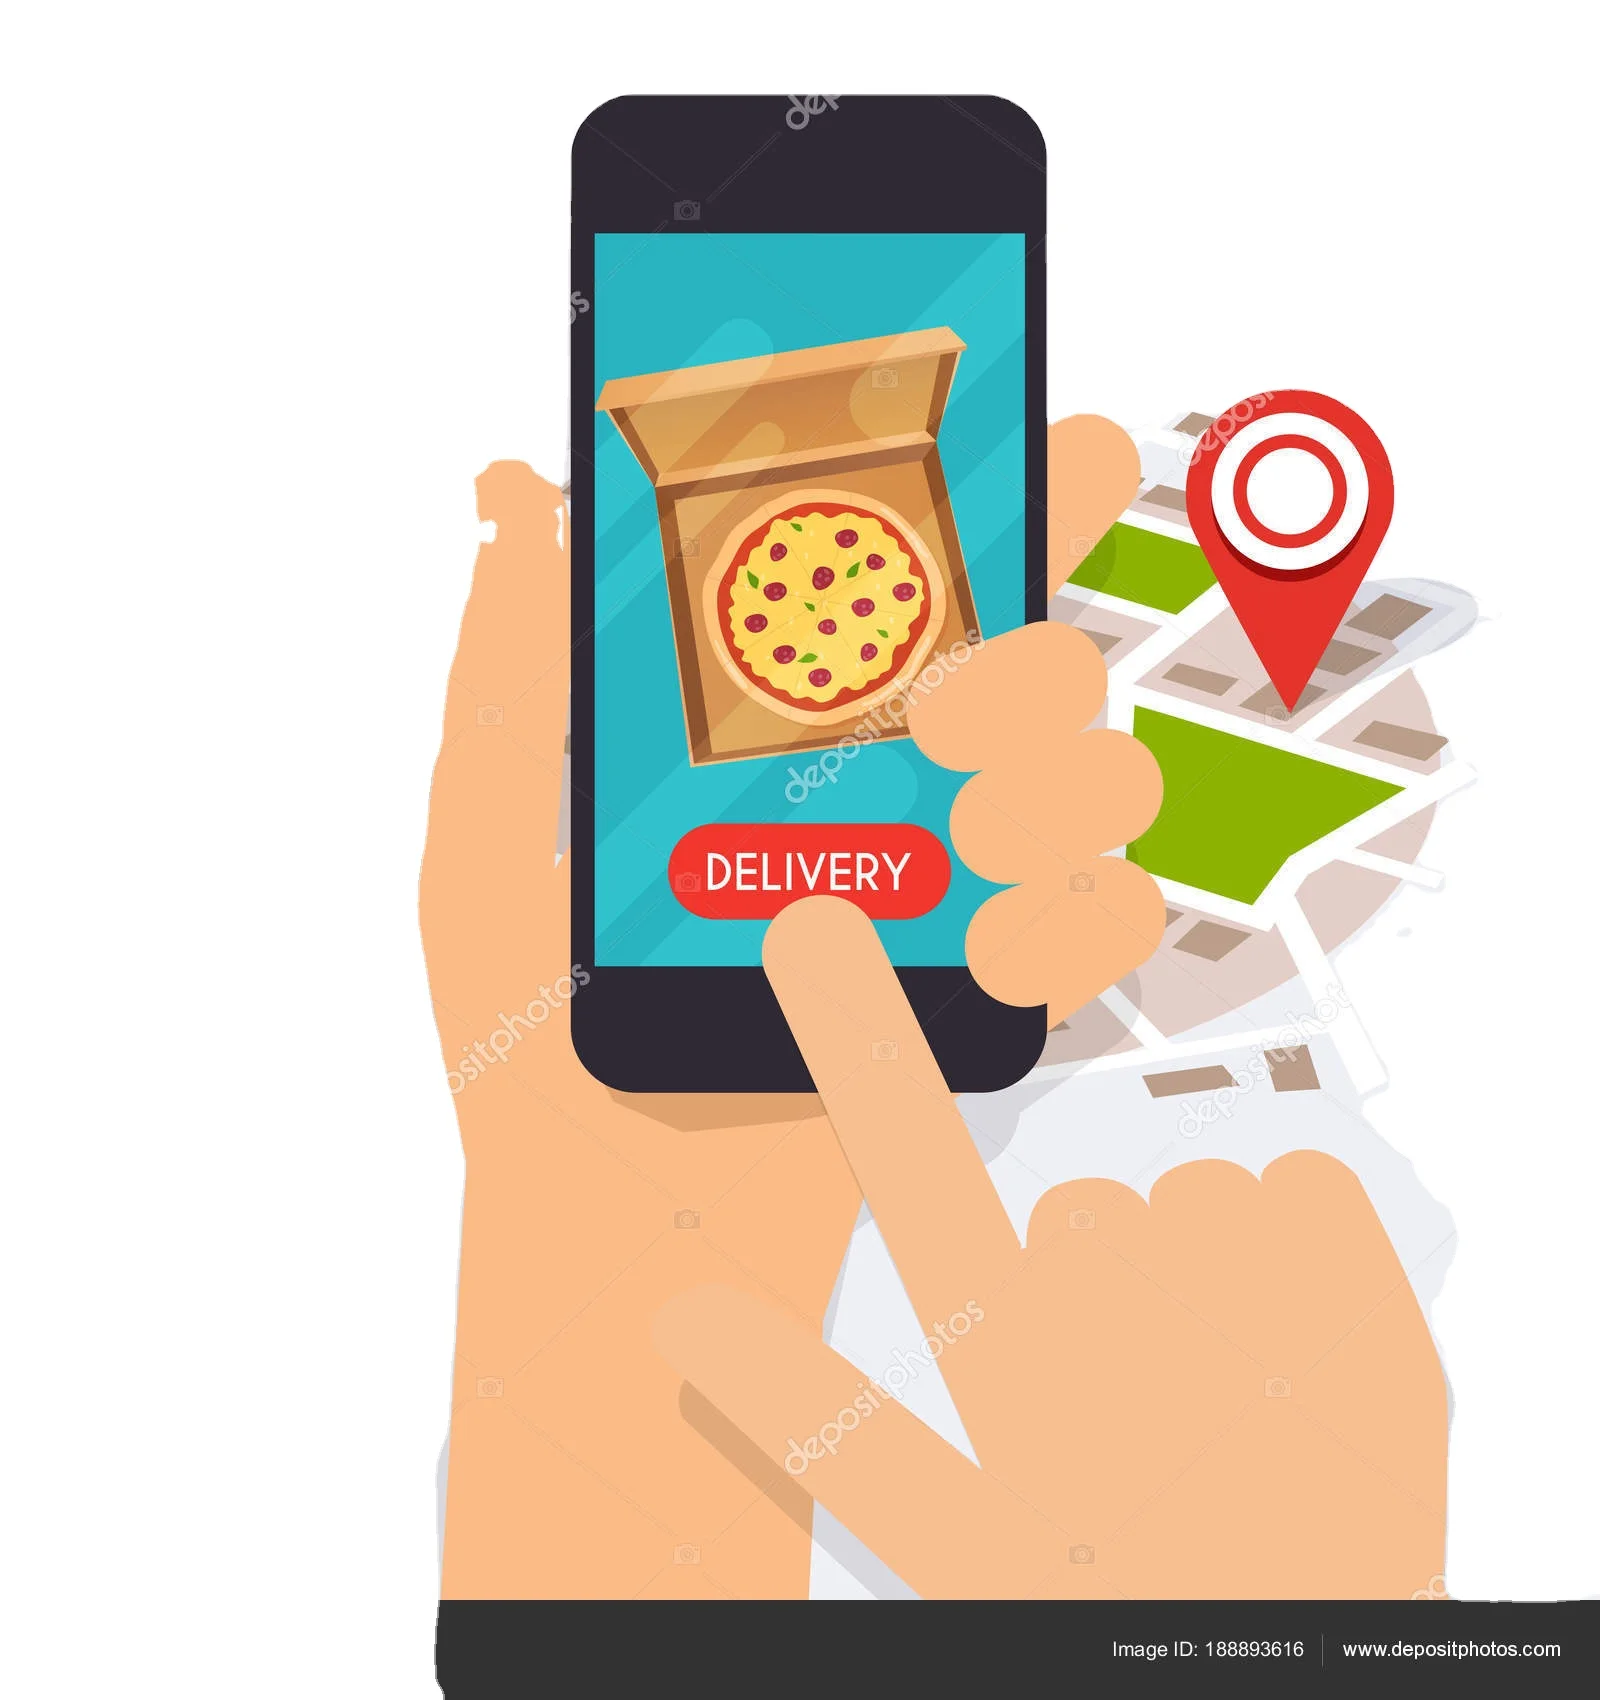 
Food Ordering Website With Android And iOS (Apps) | Web Solutions | E Commerce Website  (10000002091702)